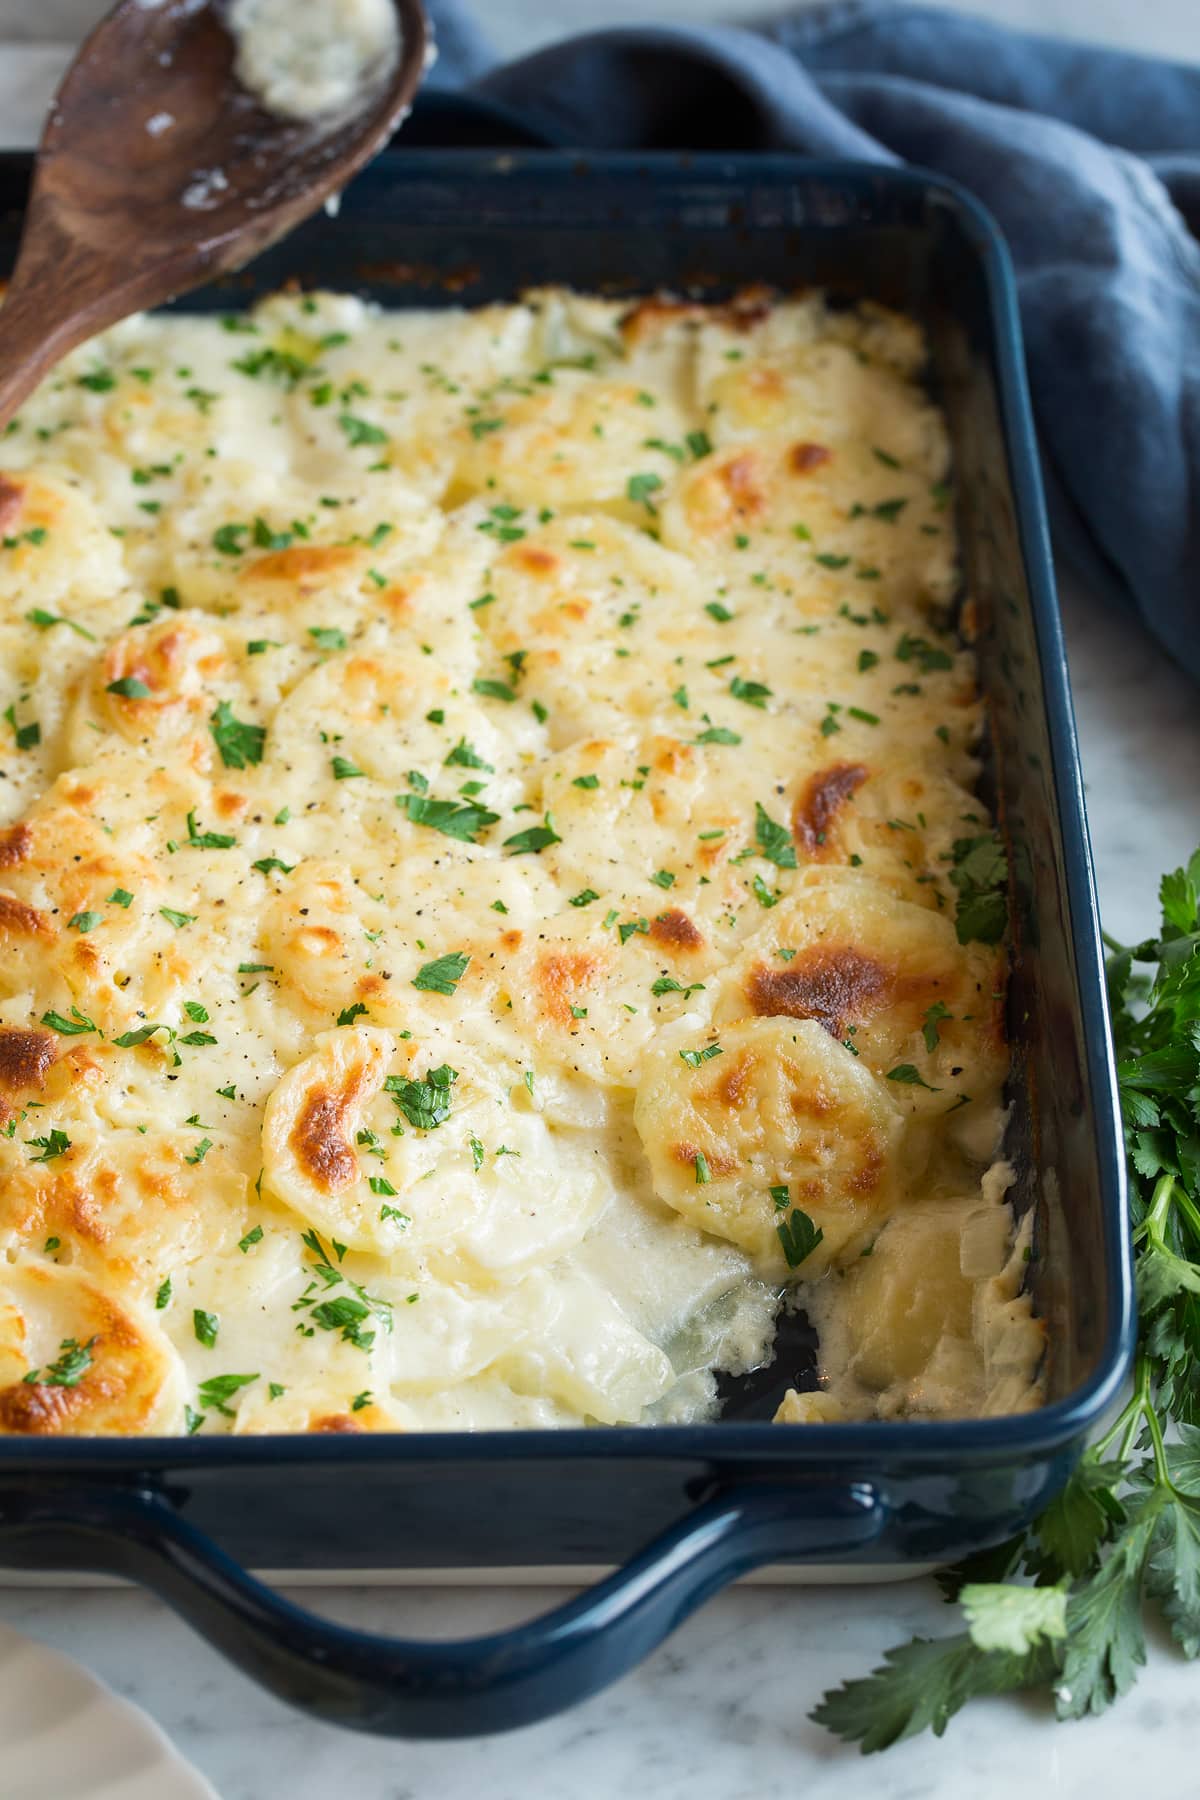 Scalloped Potatoes in a navy 13 by 9 inch baking dish set over a marble surface.